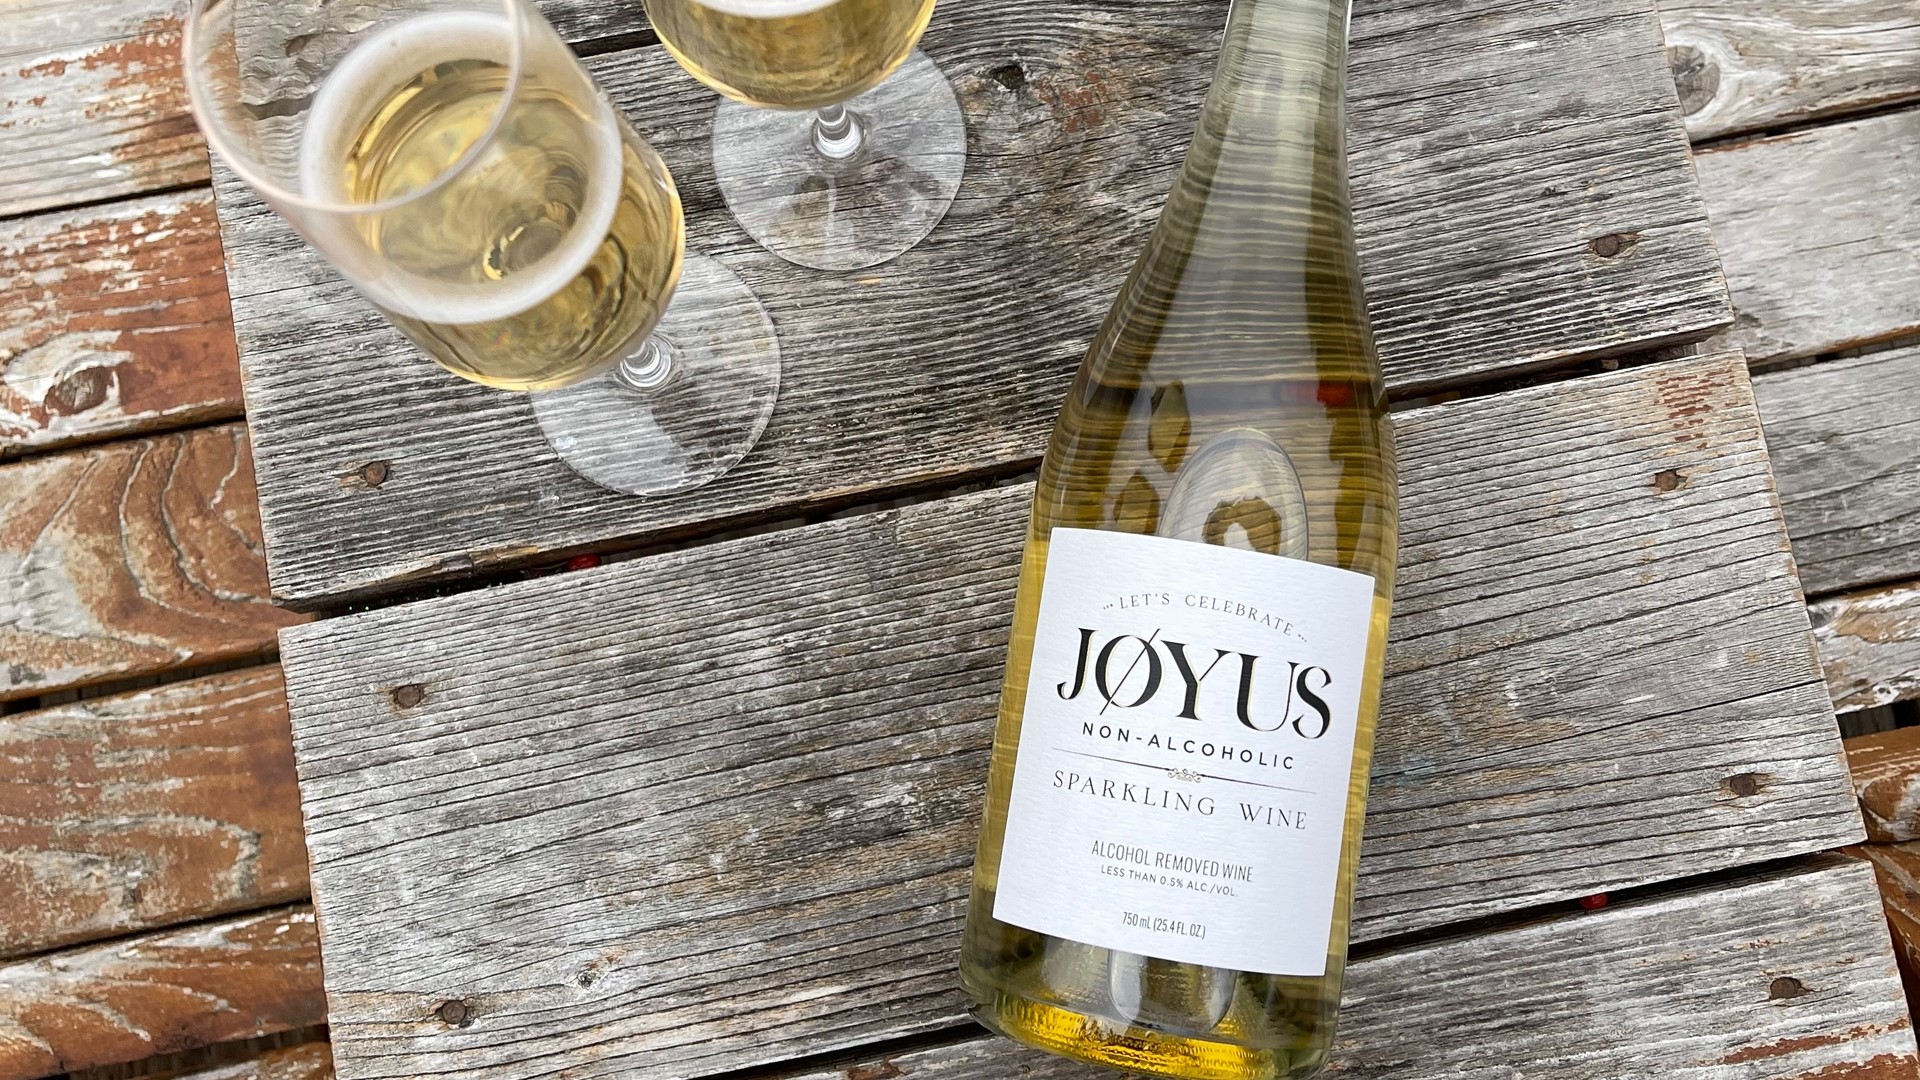 Jøyus is the creation of West Seattle resident Jess Selander, who wanted to create a non-alcoholic wine that actually tastes like wine. 🍷 #k5evening